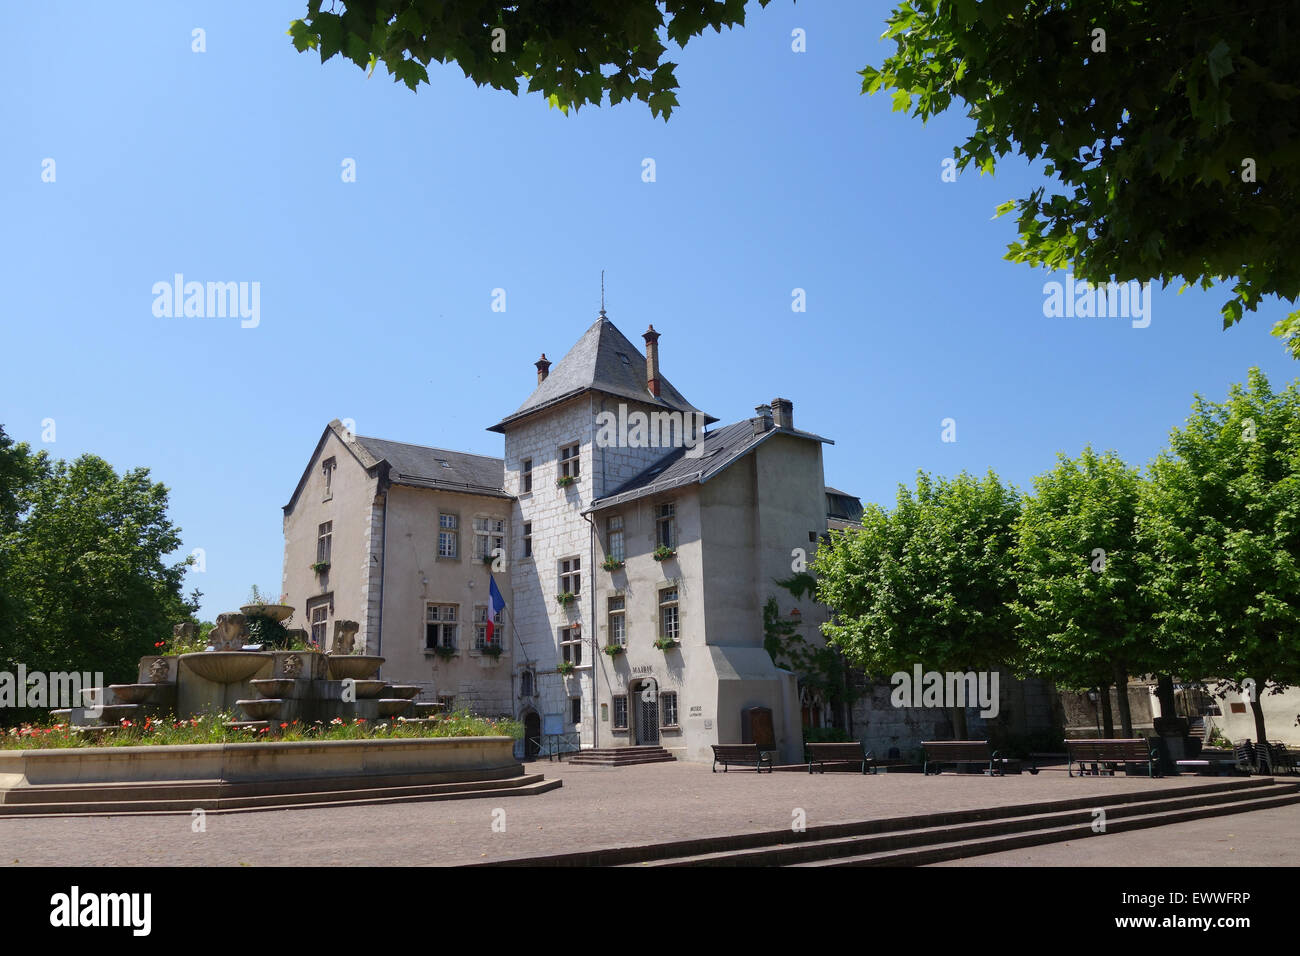 Aix-les-Bains tourism office and Mairie Stock Photo